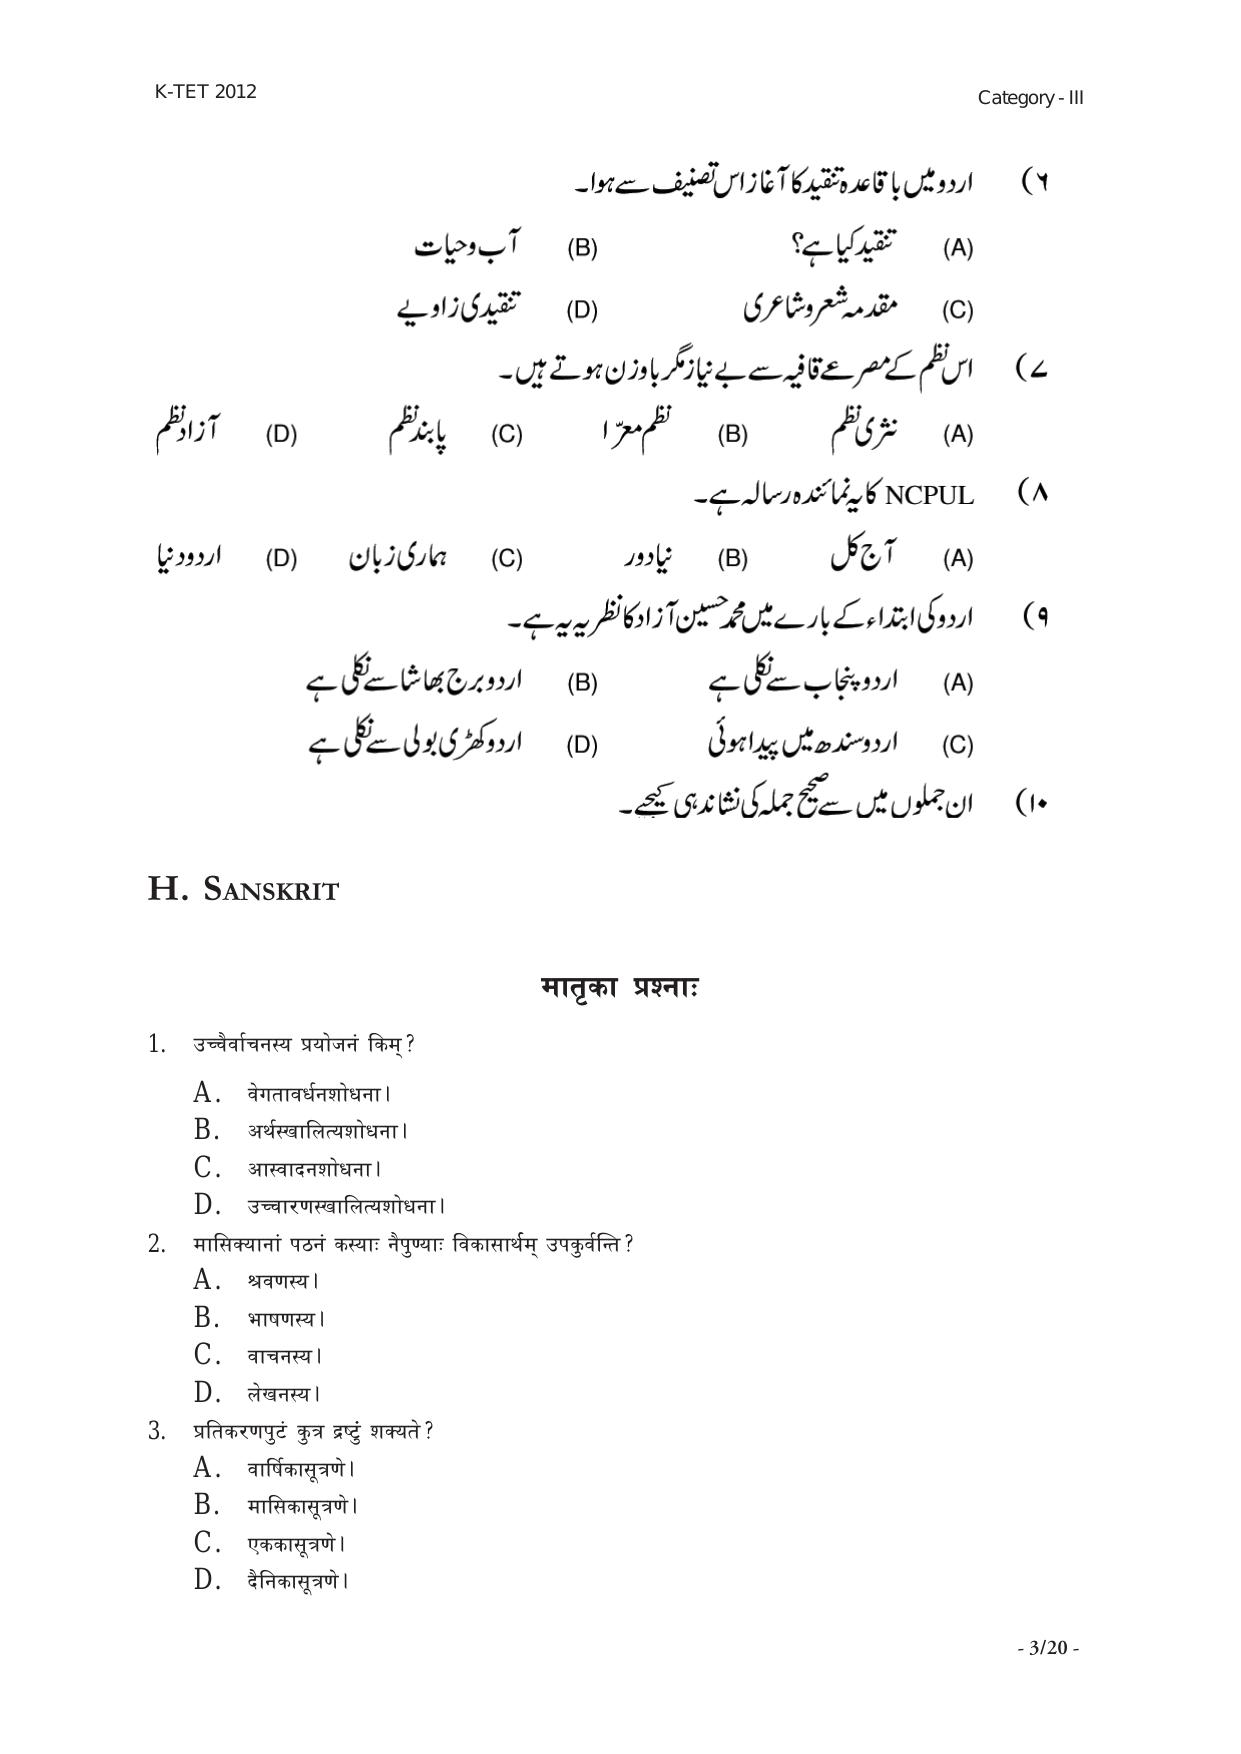 KTET Category III High School Teacher (8 to 10) Exam Previous Papers - Page 20